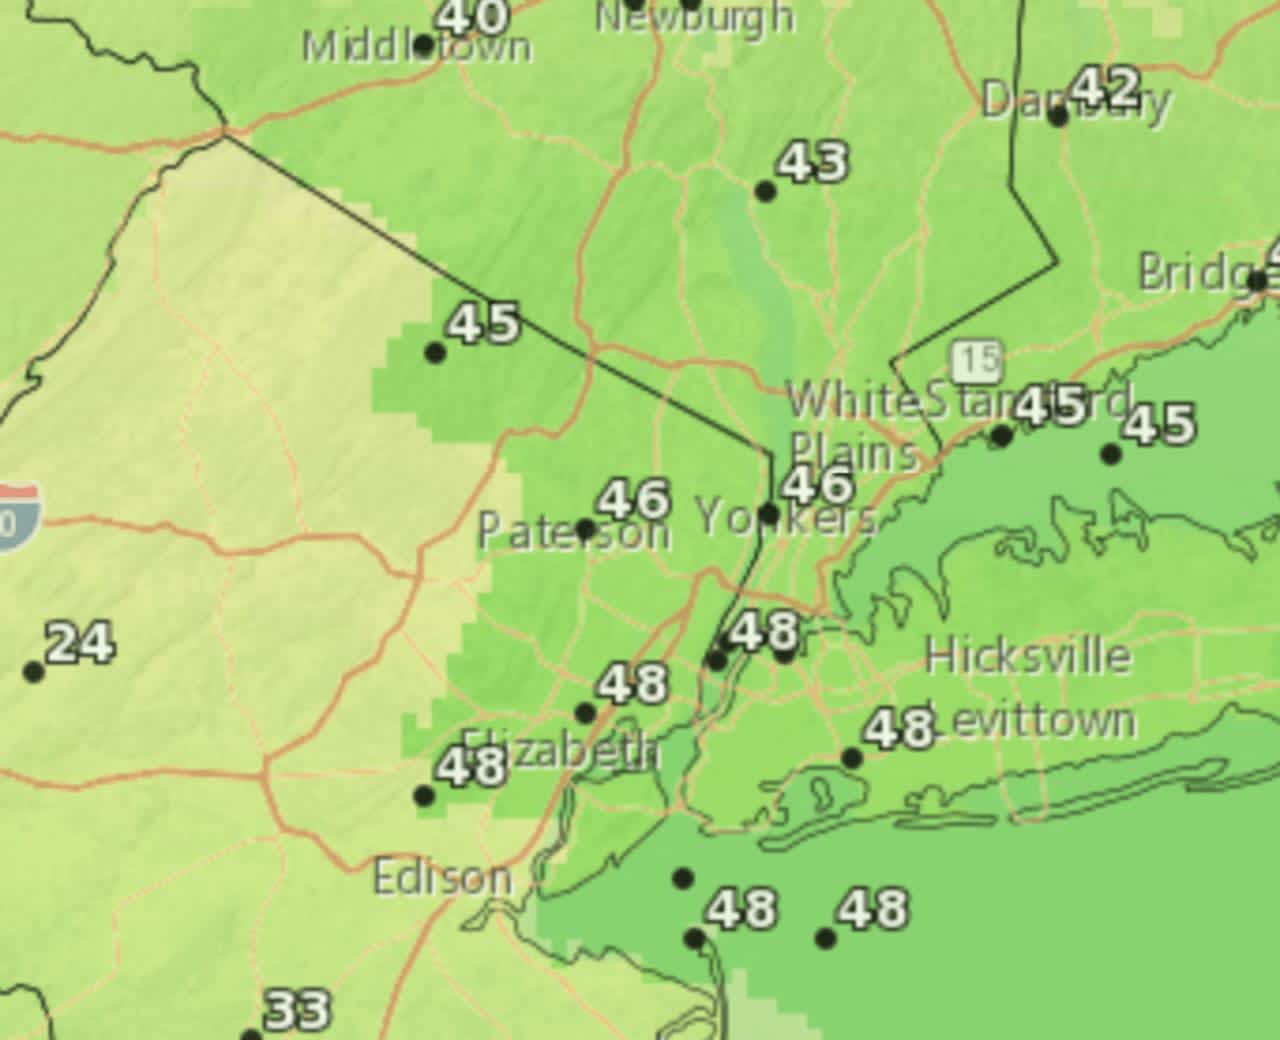 Light rain will linger in the forecast for Passaic County for most of the weekend.